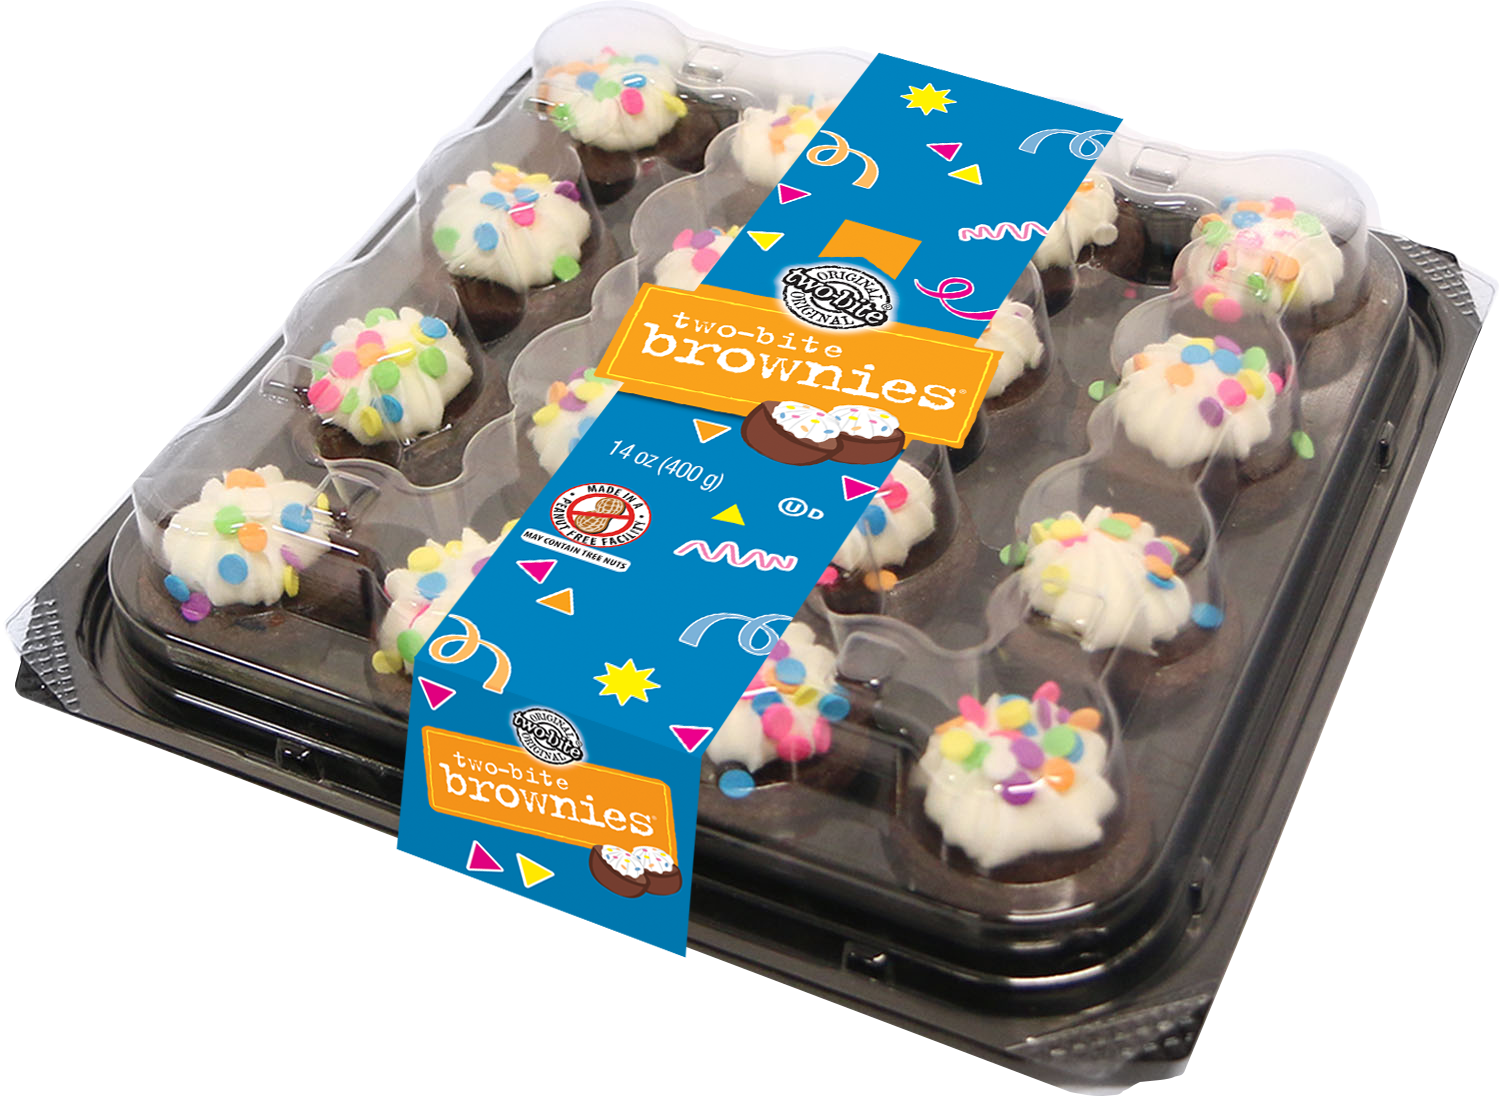 A Tray Of Brownies With Frosting And Sprinkles